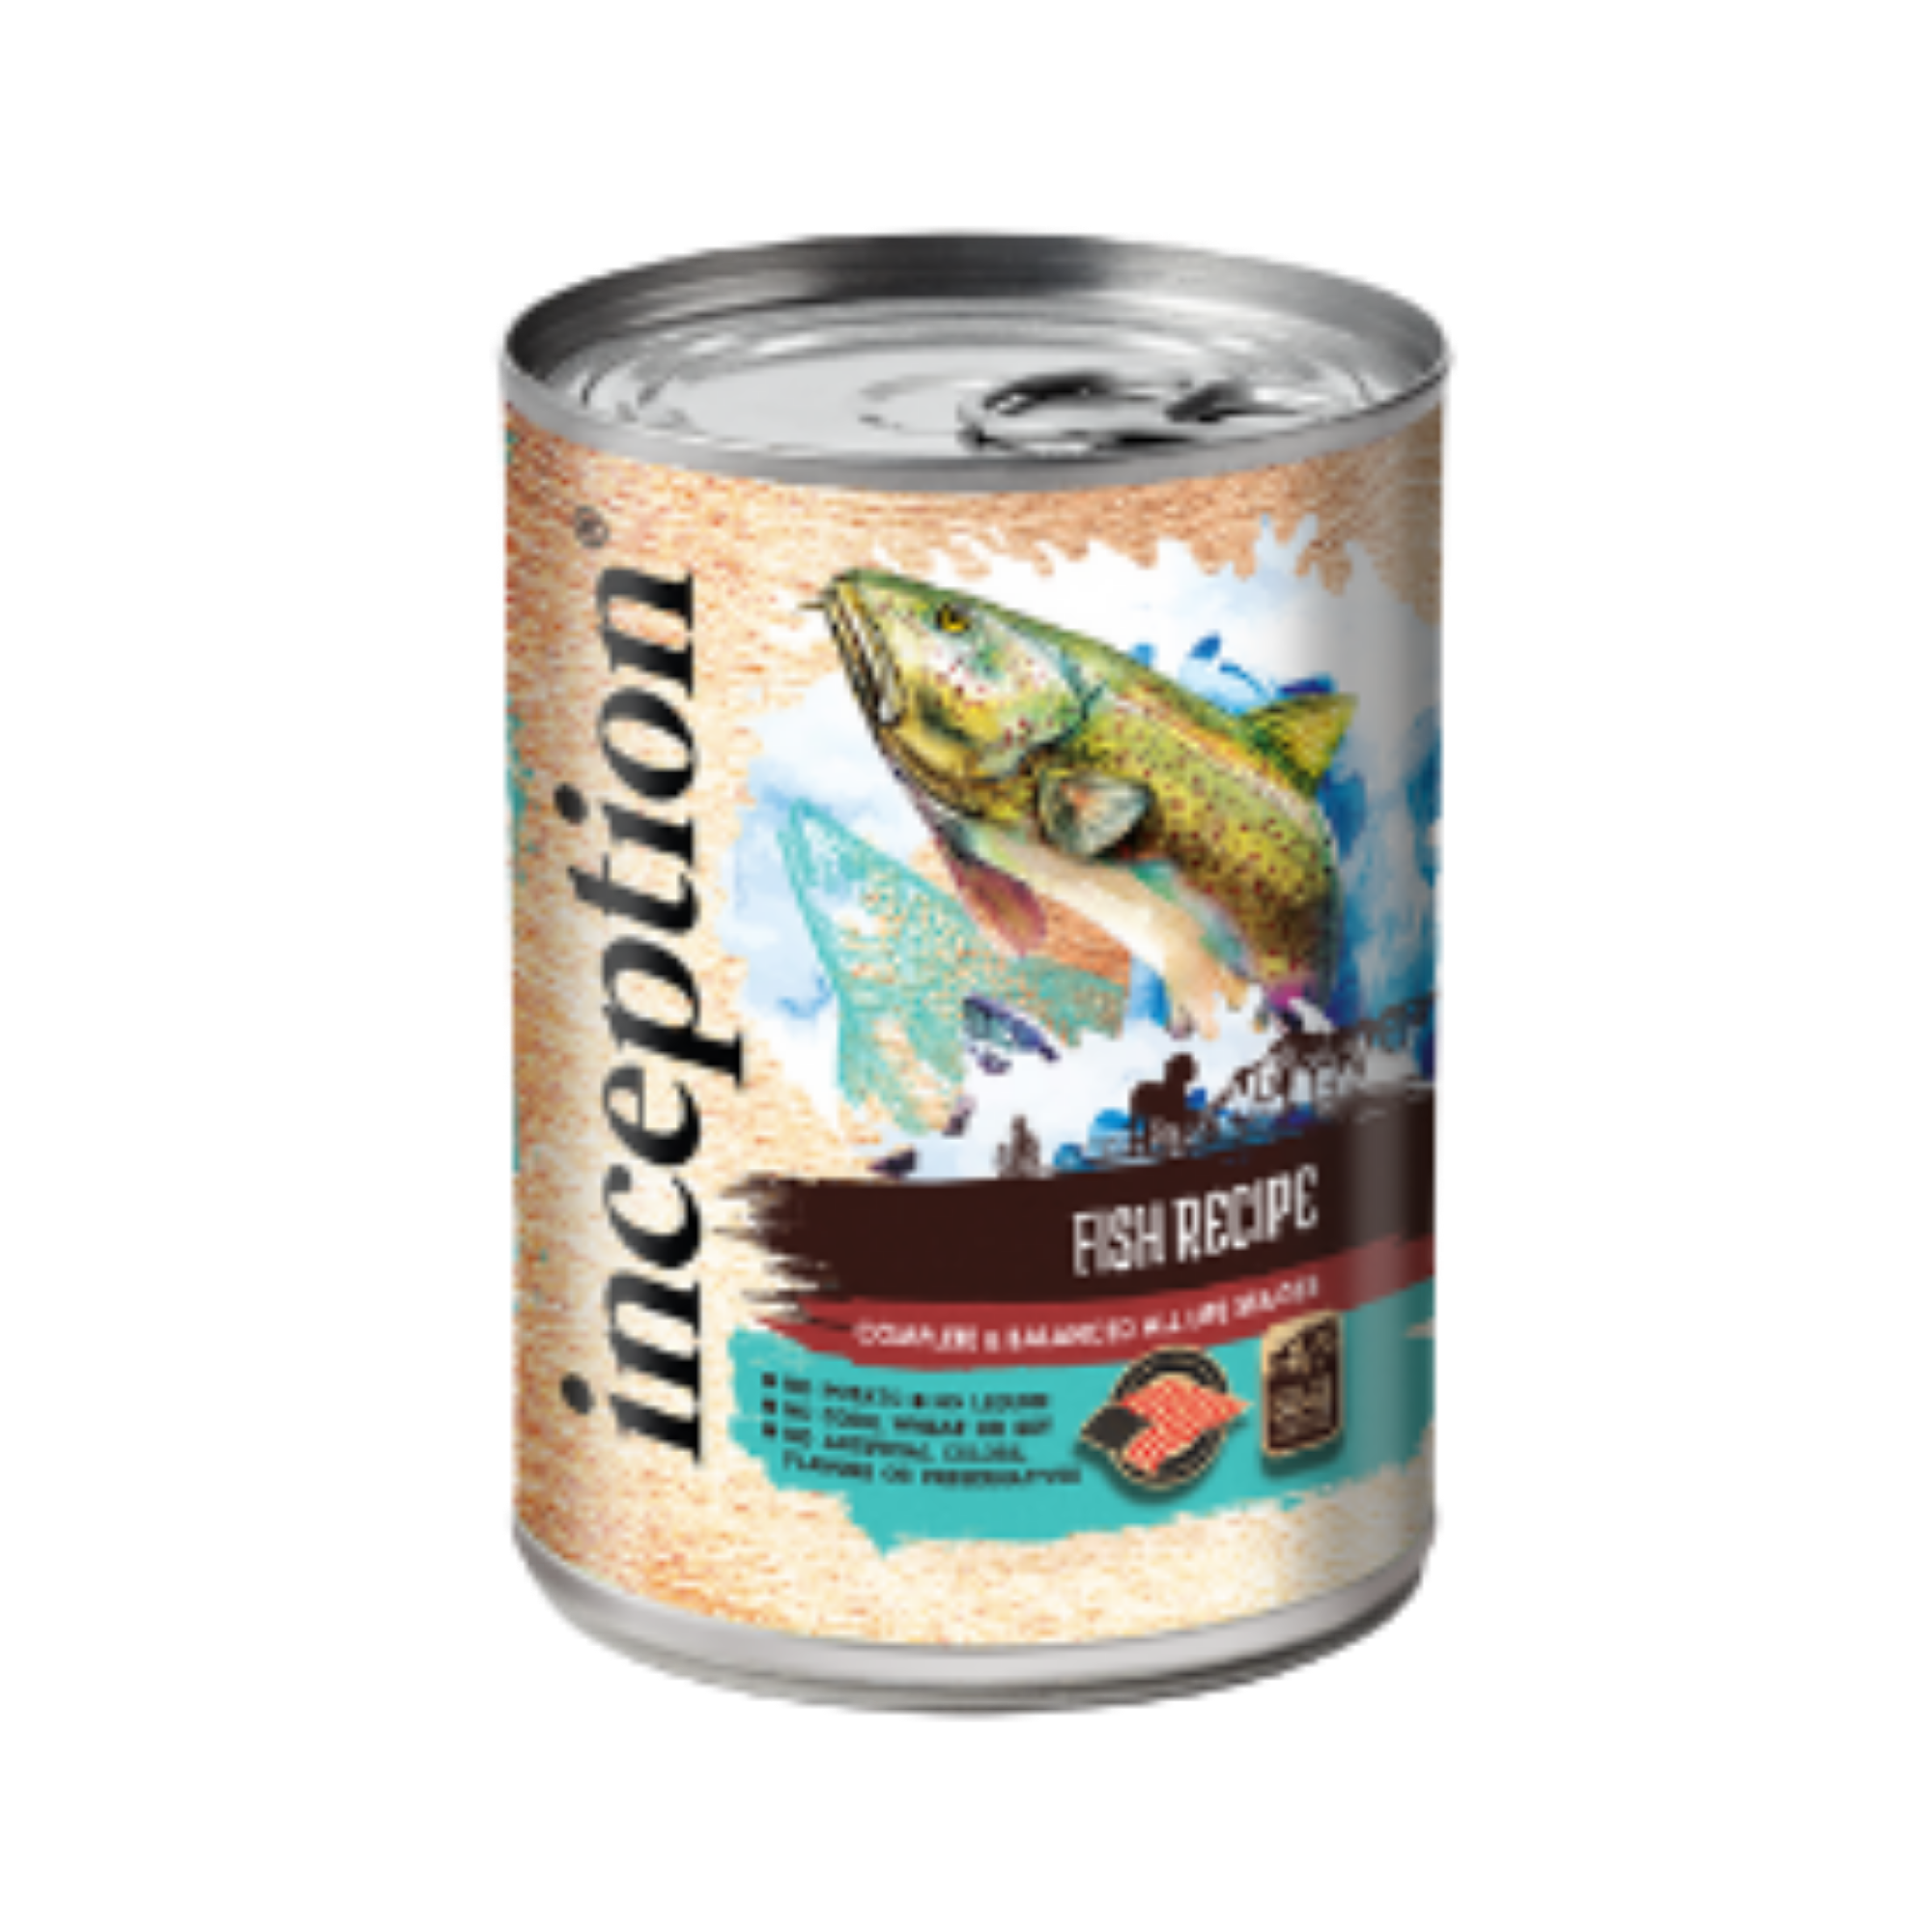 Inception Fish Recipe Canned Dog Food 13oz - Mutts & Co.